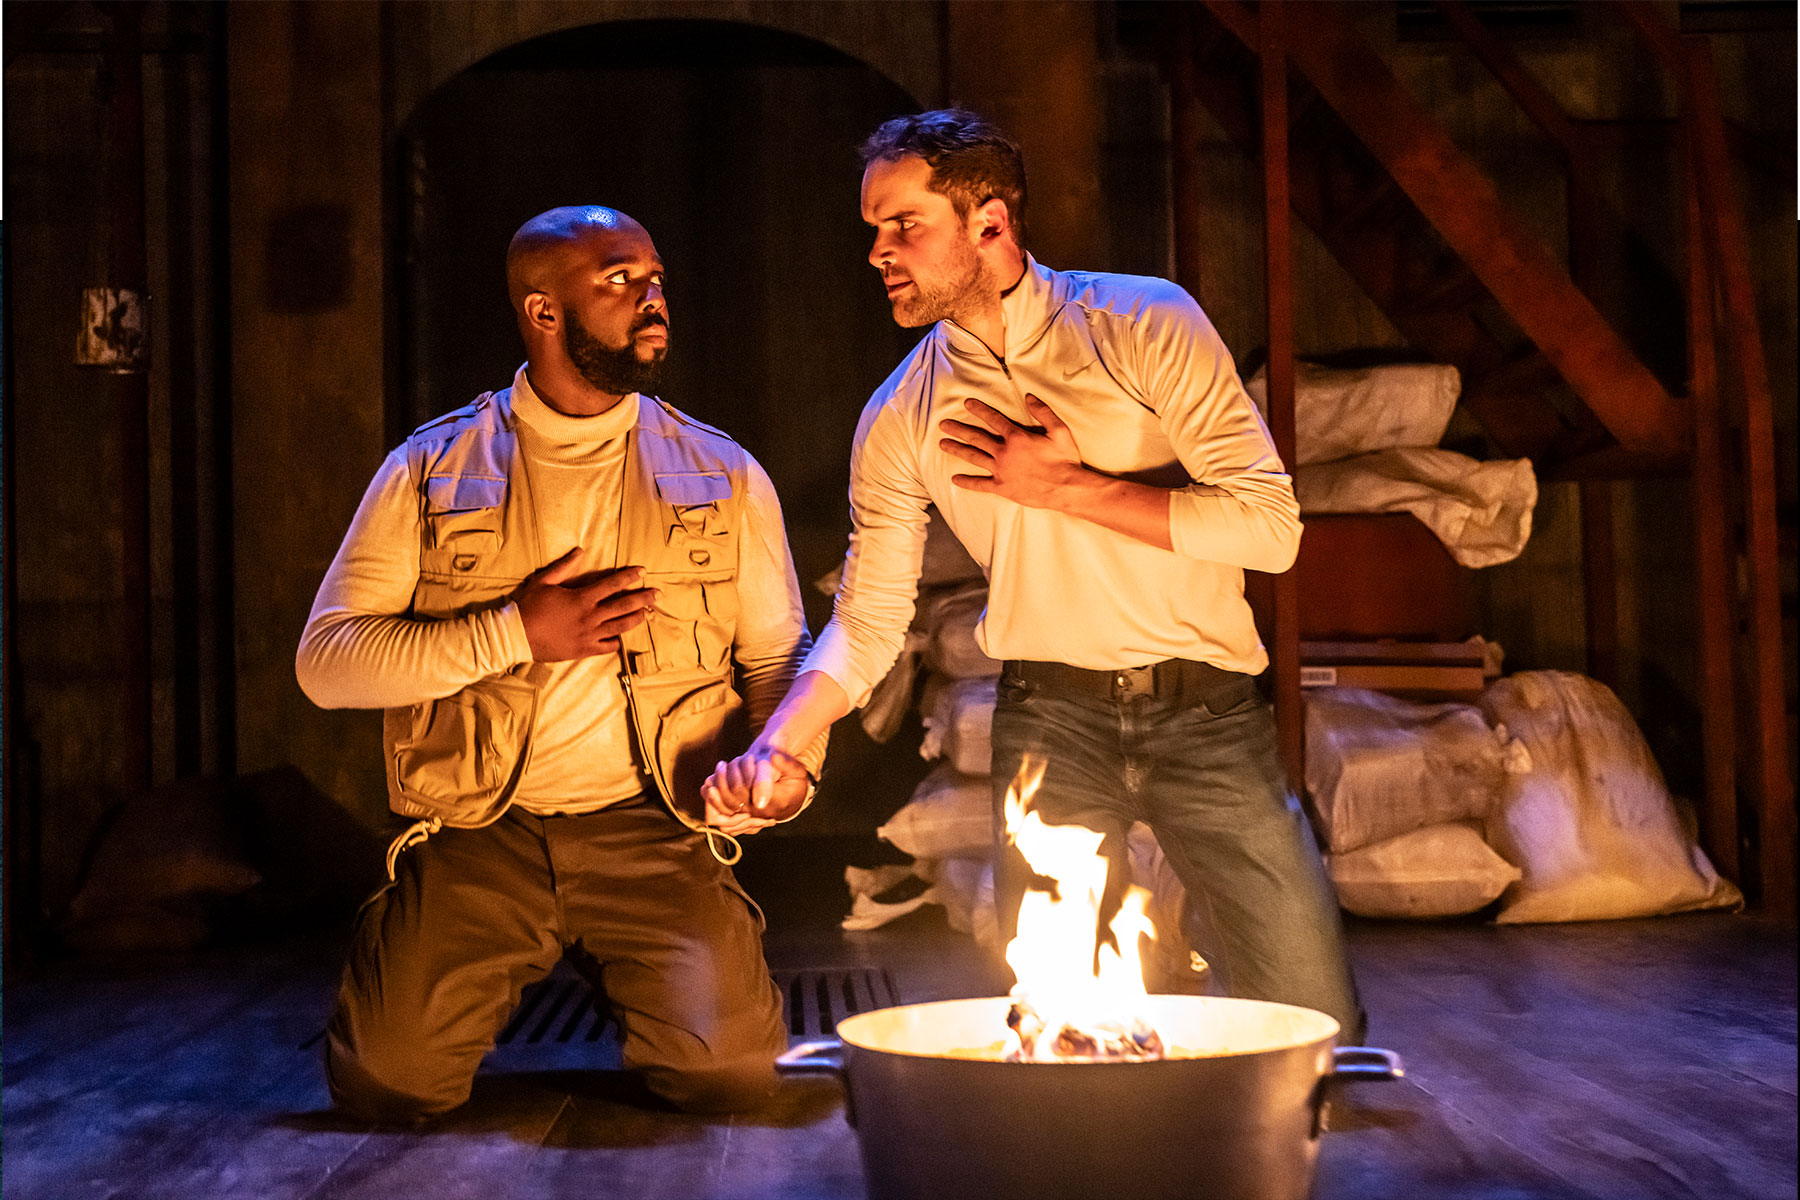 Ken Nwosu as Othello and Ralph Davis as Iago in a scene from Othello in the Sam Wanamaker Playhouse at Shakespeare's Globe